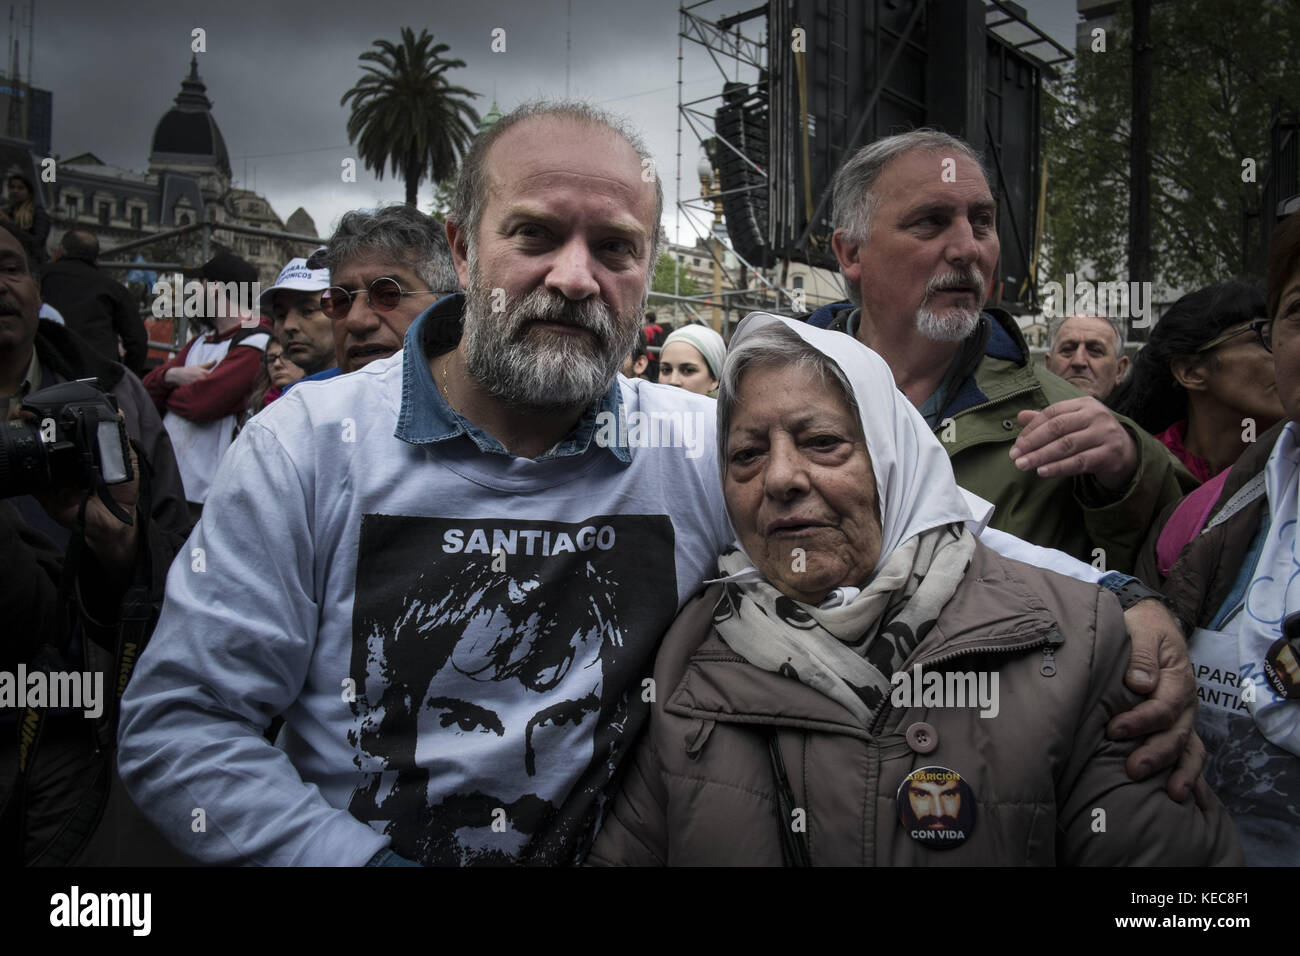 Federal Capital, Buenos Aires, Argentina. 16th Sep, 2017. A demonstrator is seen gathering to protest against the disappearance of Santiago Maldonado since 1 August 2017 while wearing a clothes with the photo of Santiago Maldonado.Despite the rain, thousands of protesters gathered on Sunday in Plaza de Mayo hosted by the relatives and friends of Santiago Maldonado two months after his disappearance, after he was reportedly surrendering to Argentinian police guards during a raid on a camp of Mapuche protesters in Patagonia, south of Argentina. Various protests were seen in several other Stock Photo